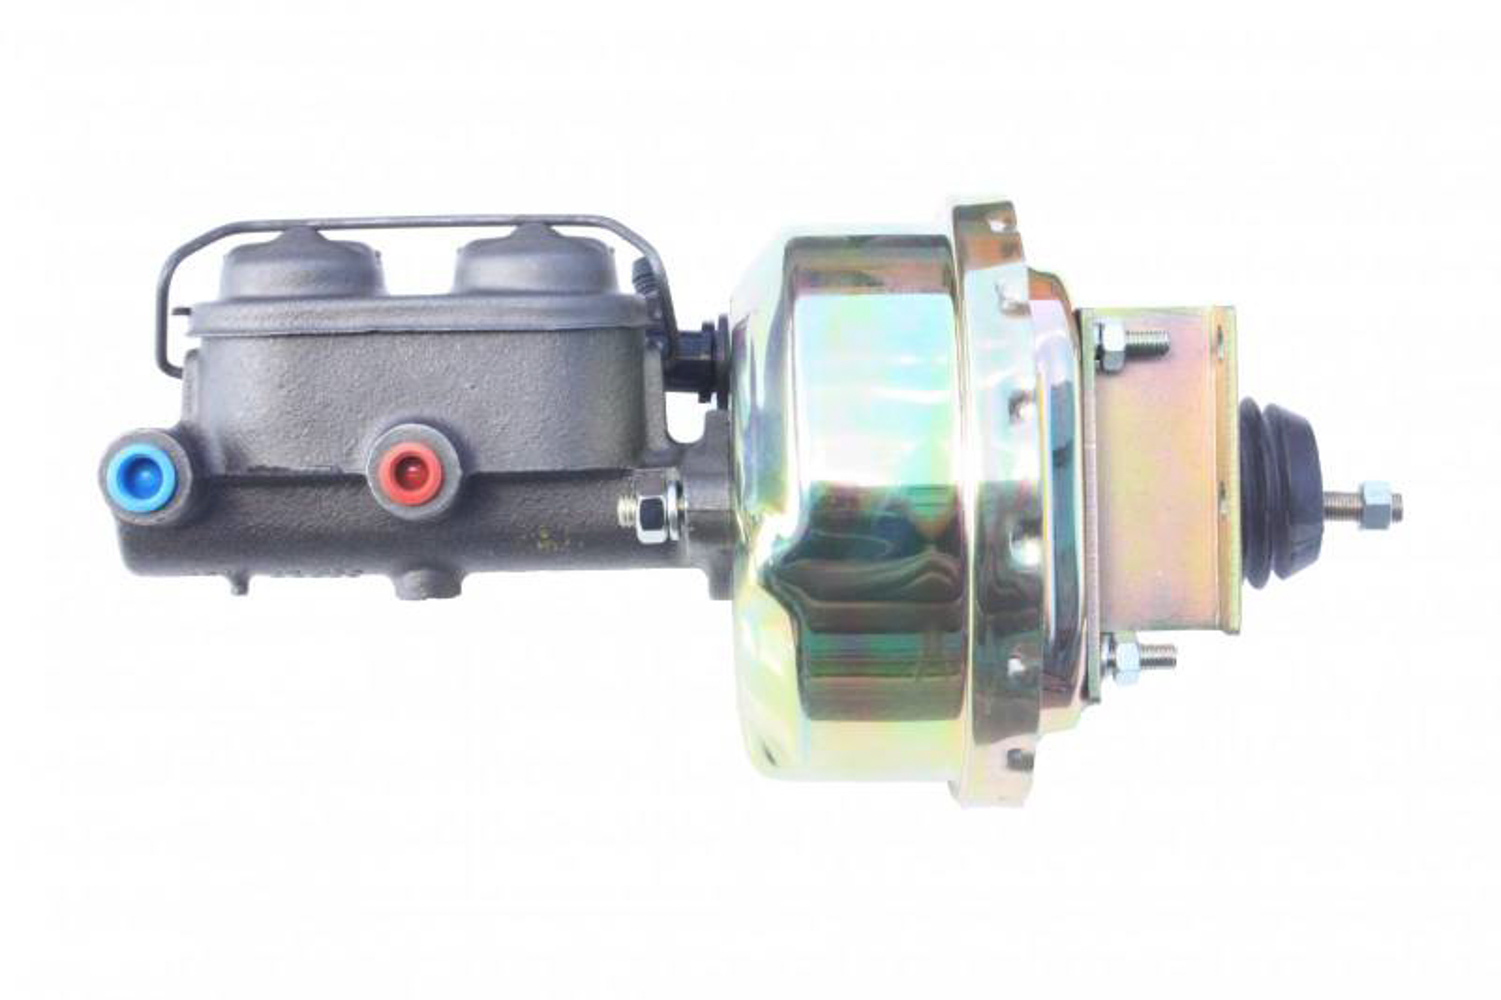 Leed Brakes 5H8 - Master Cylinder and Booster, 1 in Bore, Dual Integral Reservoir, 7 in OD, Single Diaphragm, Steel, Zing Plated, Ford Mustang 1964-66, Kit